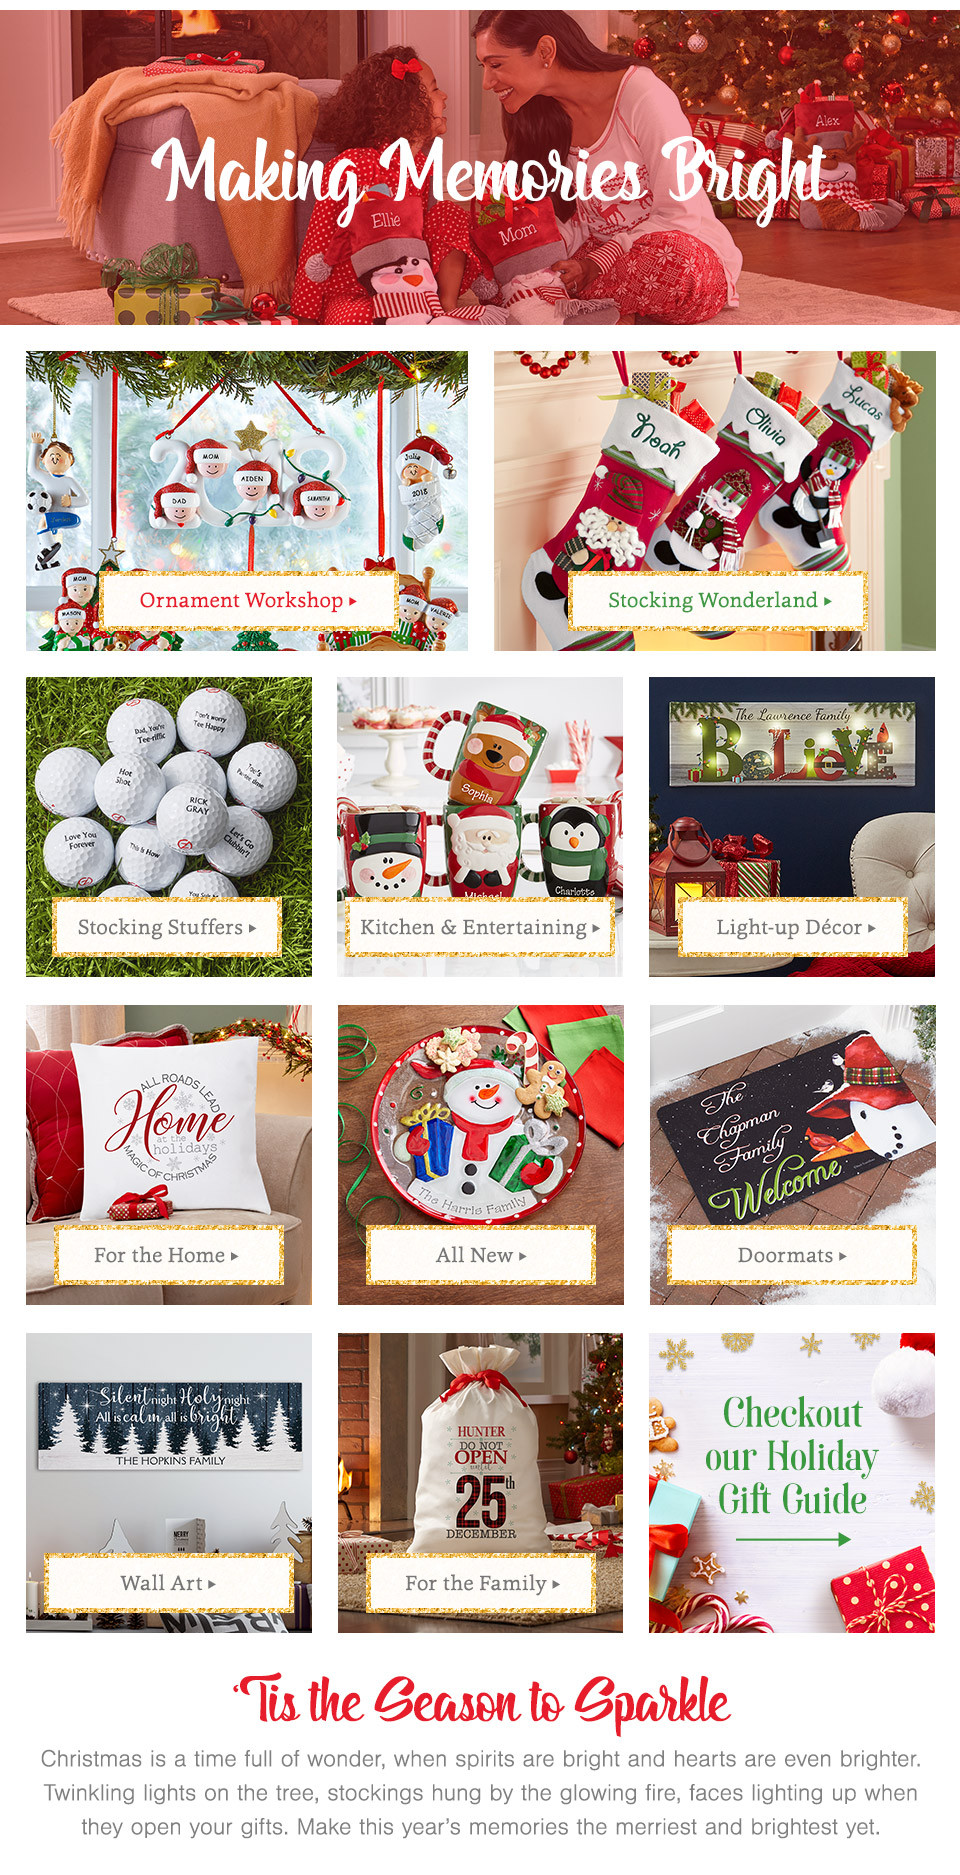 Christmas 2019 Gift Ideas
 2019 Personalized Christmas Gifts